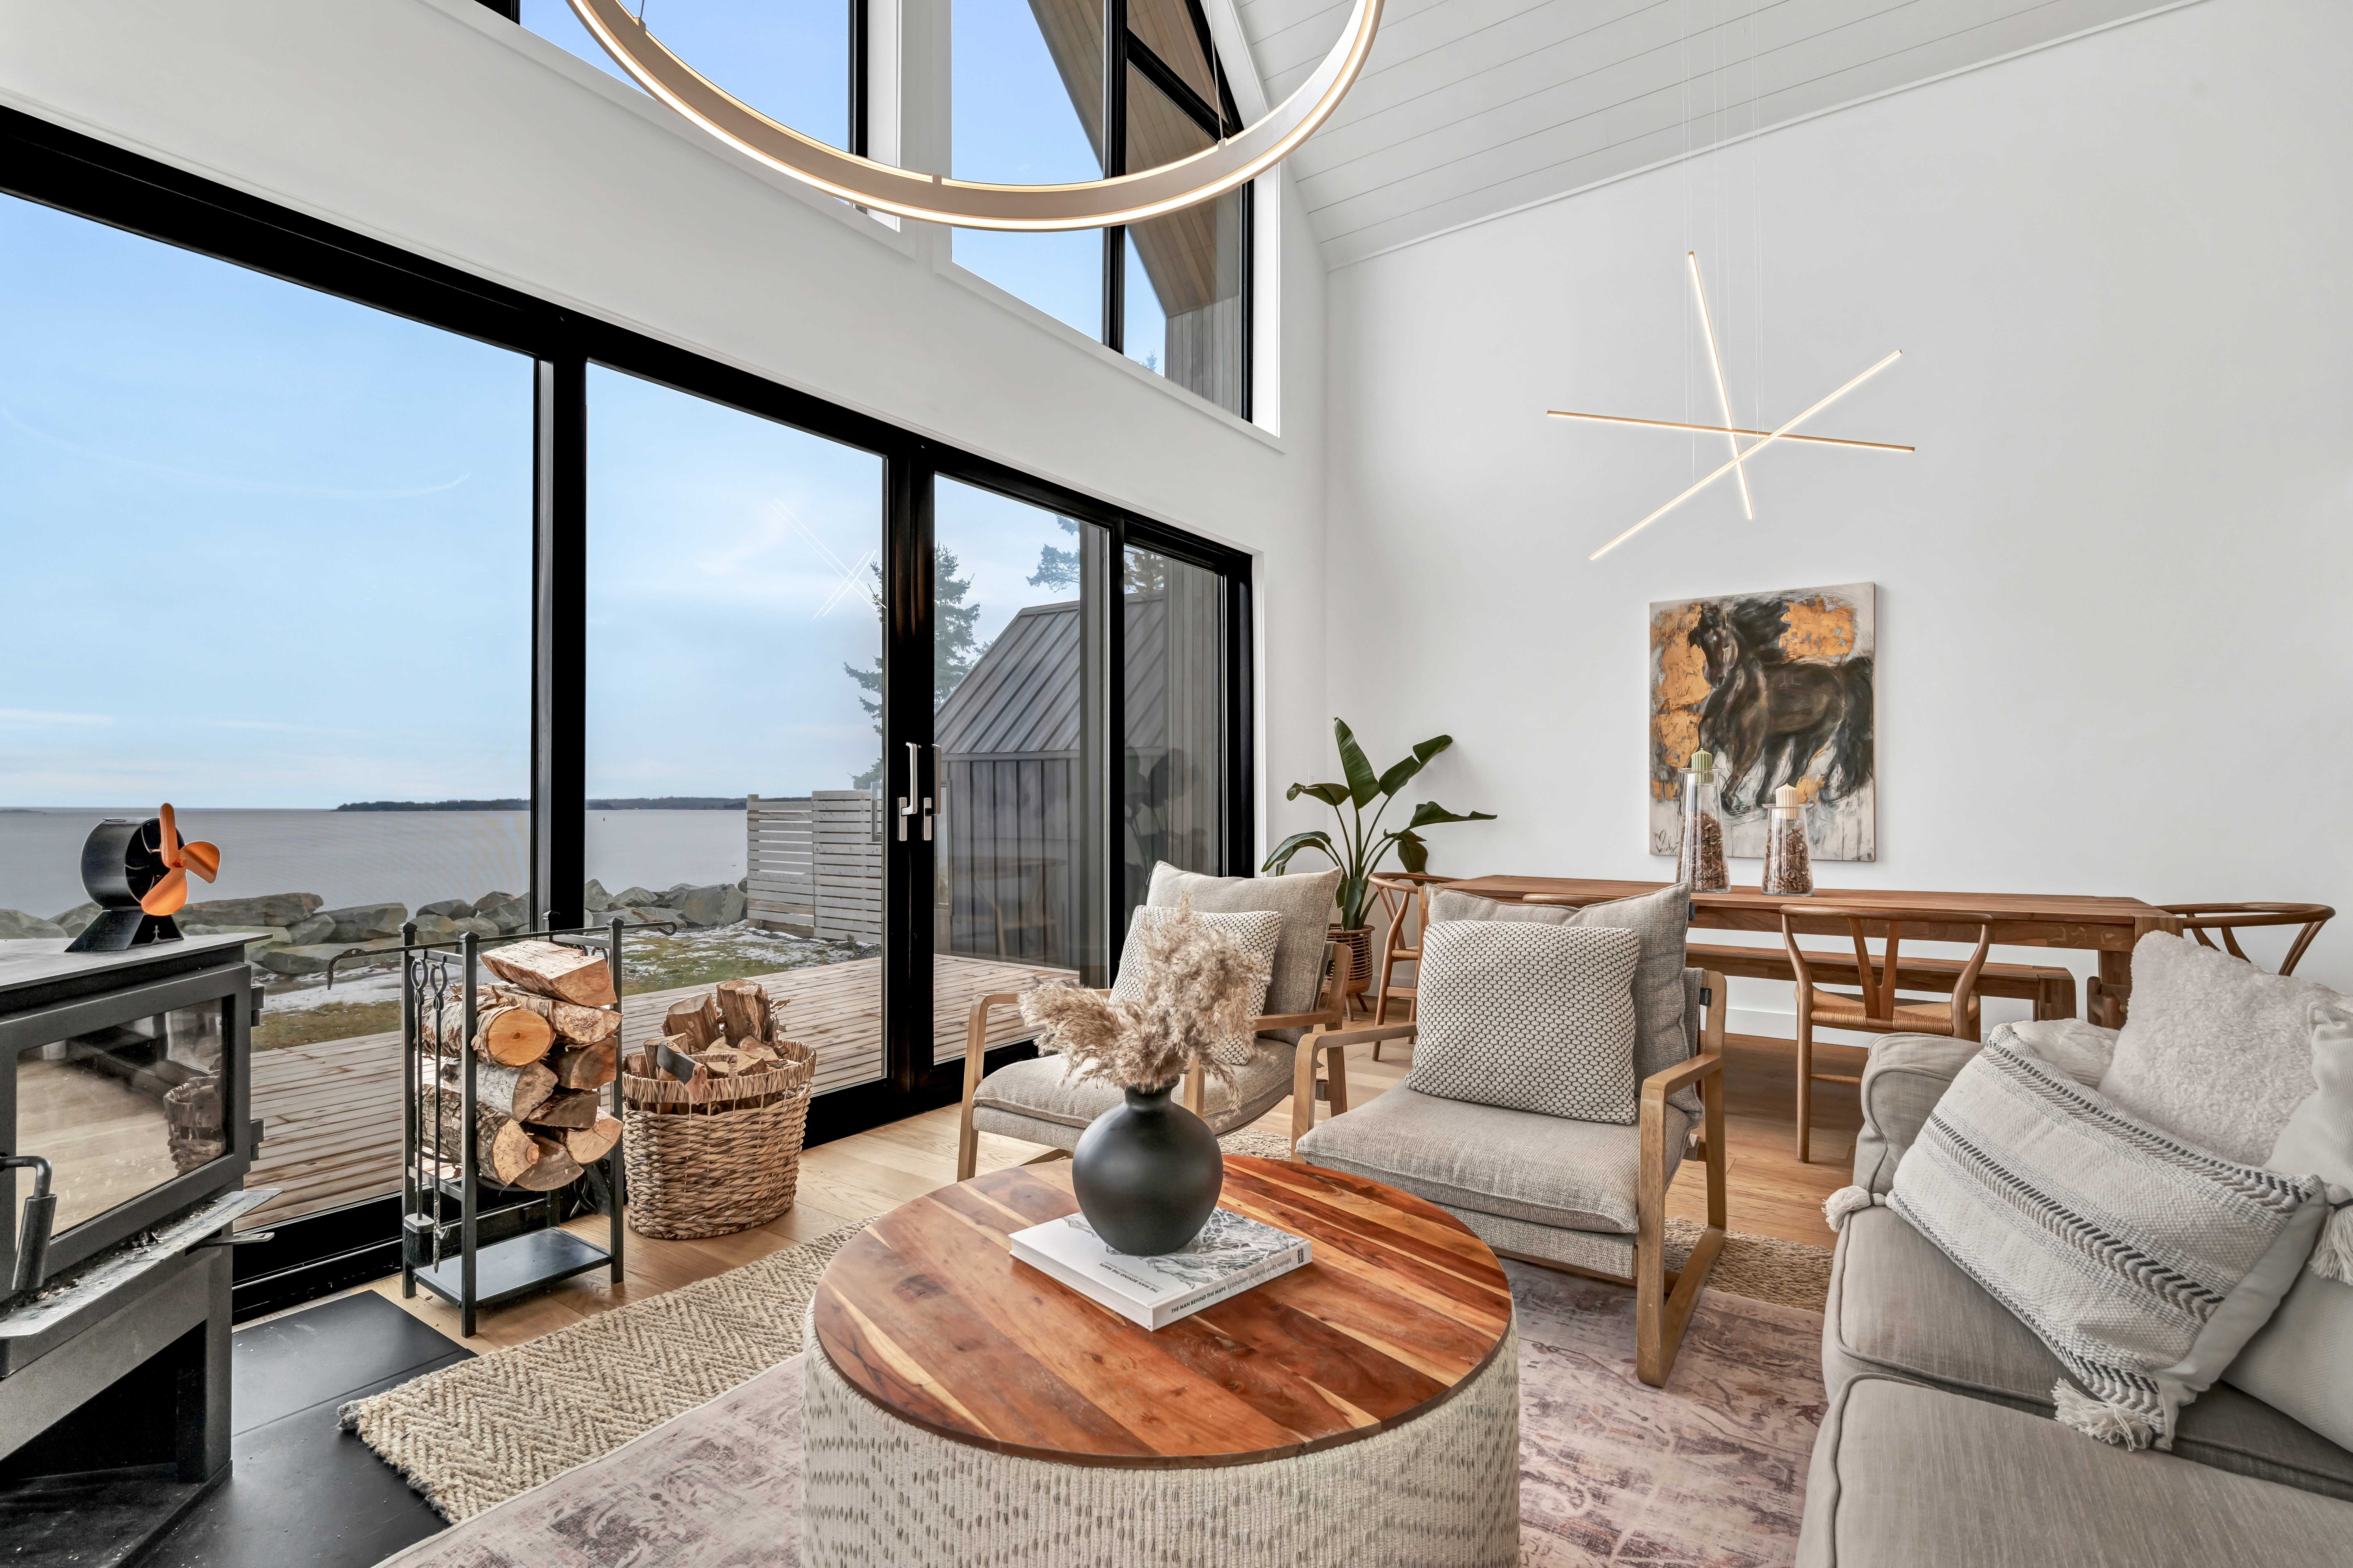 A big open-concept living area. Floor-to-ceiling windows look out to the ocean and let in lots of natural light.